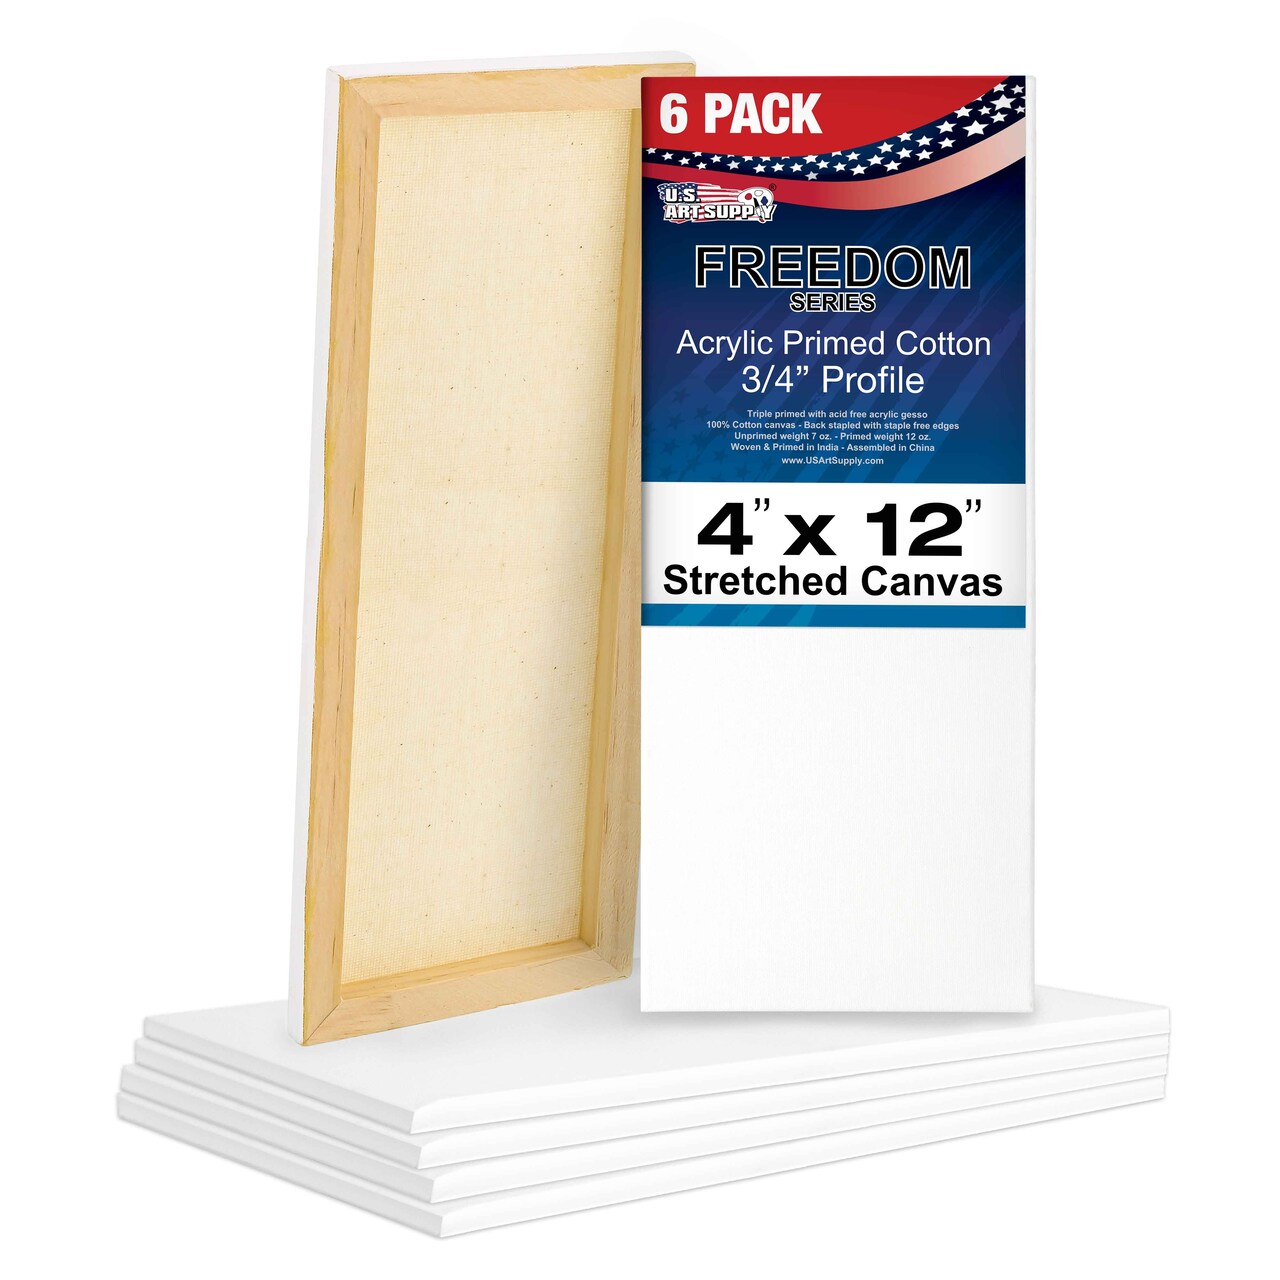 4 x 12 inch Stretched Canvas 12-Ounce Triple Primed, 6-Pack - Professional Artist Quality White Blank 3/4&#x22; Profile, 100% Cotton, Heavy-Weight Gesso